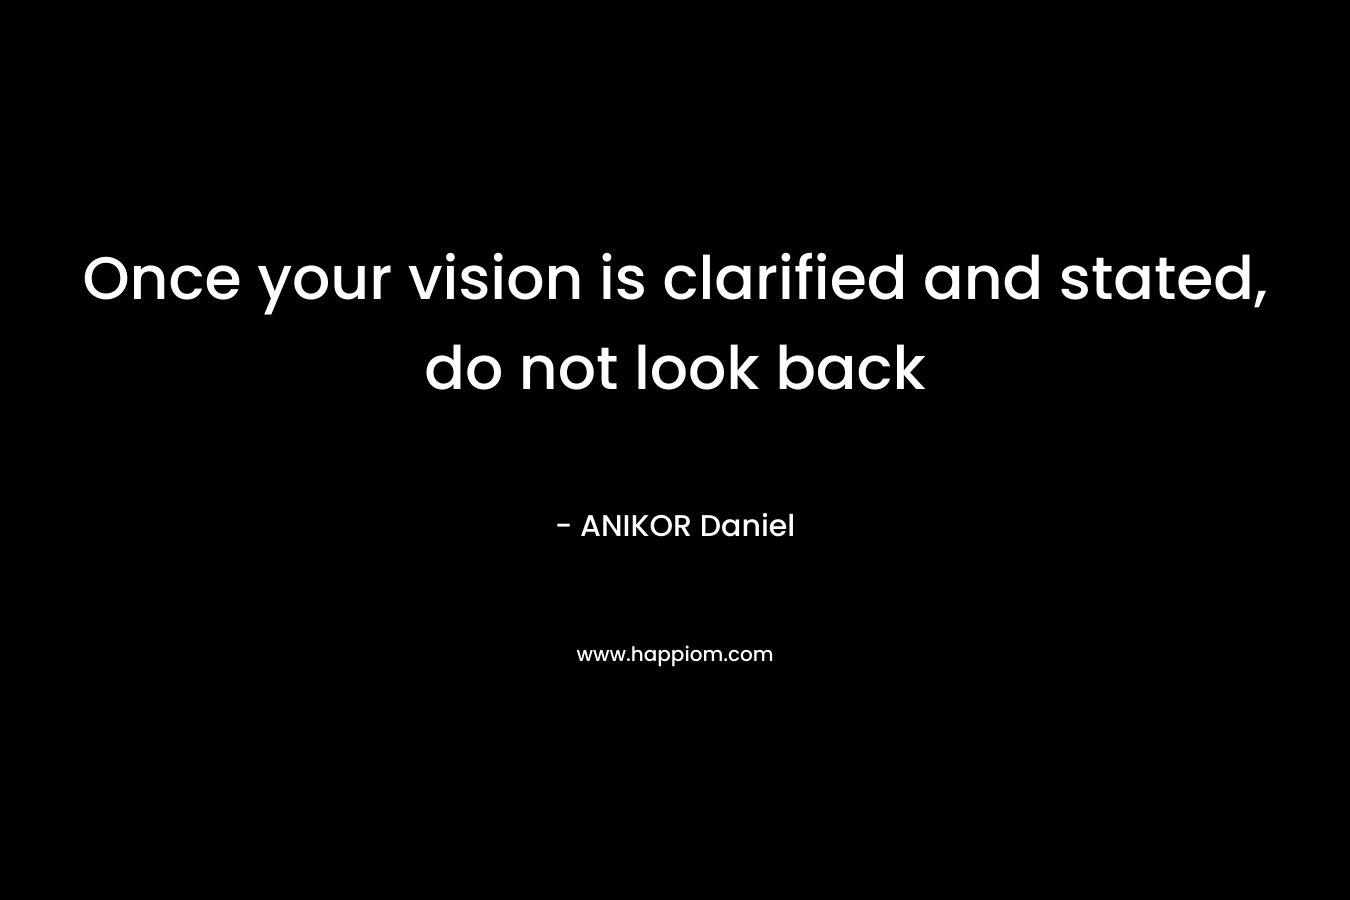 Once your vision is clarified and stated, do not look back – ANIKOR Daniel